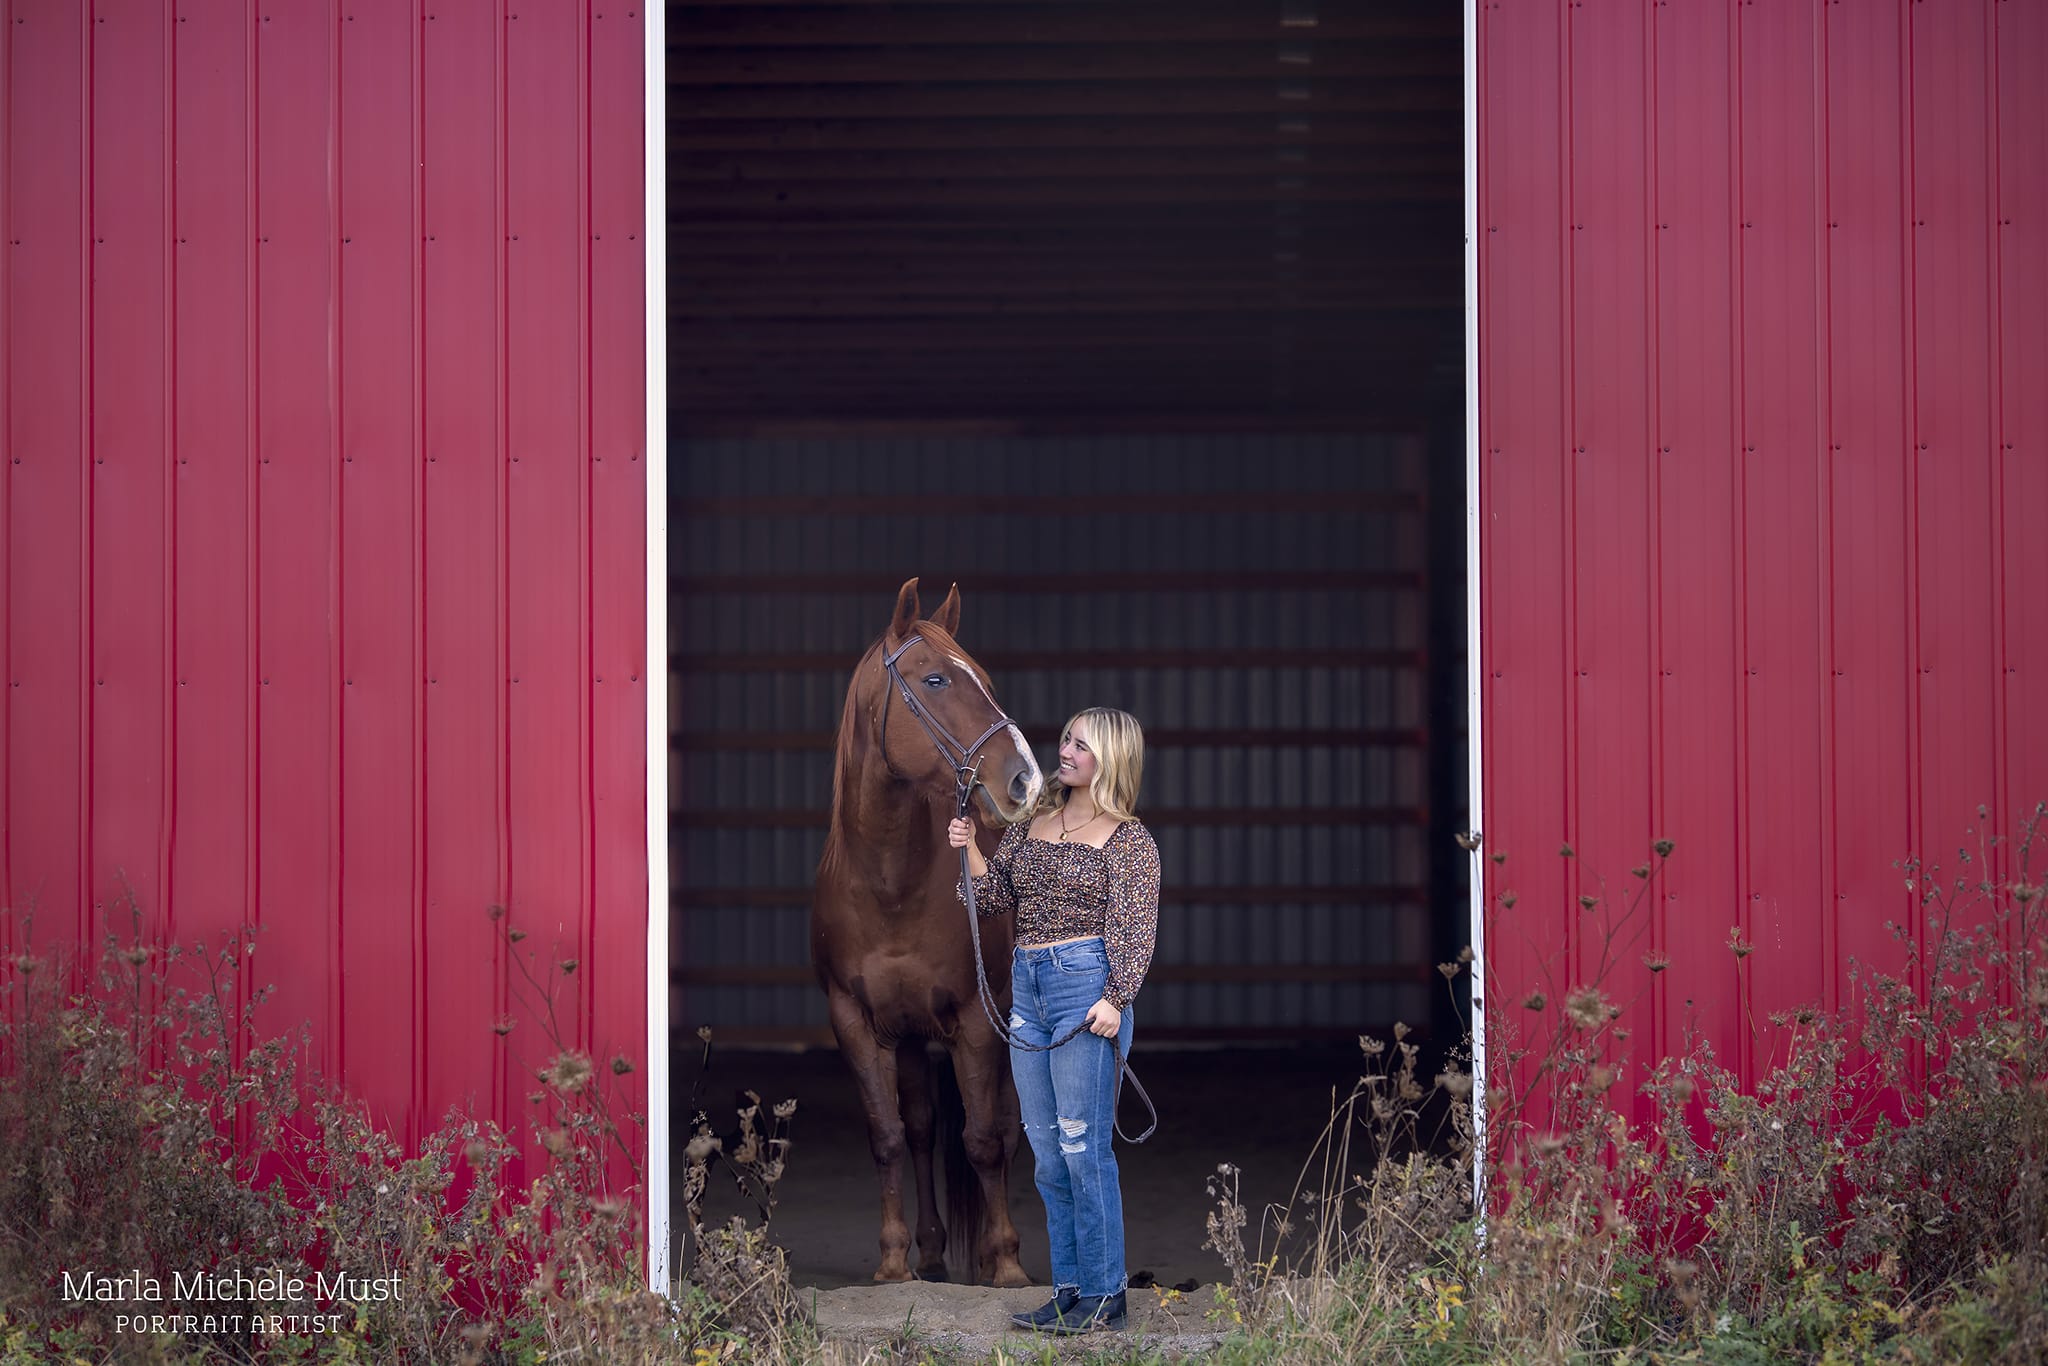 A rustic photograph by a Detroit equine photographer, featuring the owner standing alongside their horse in the doorway of a large red barn.